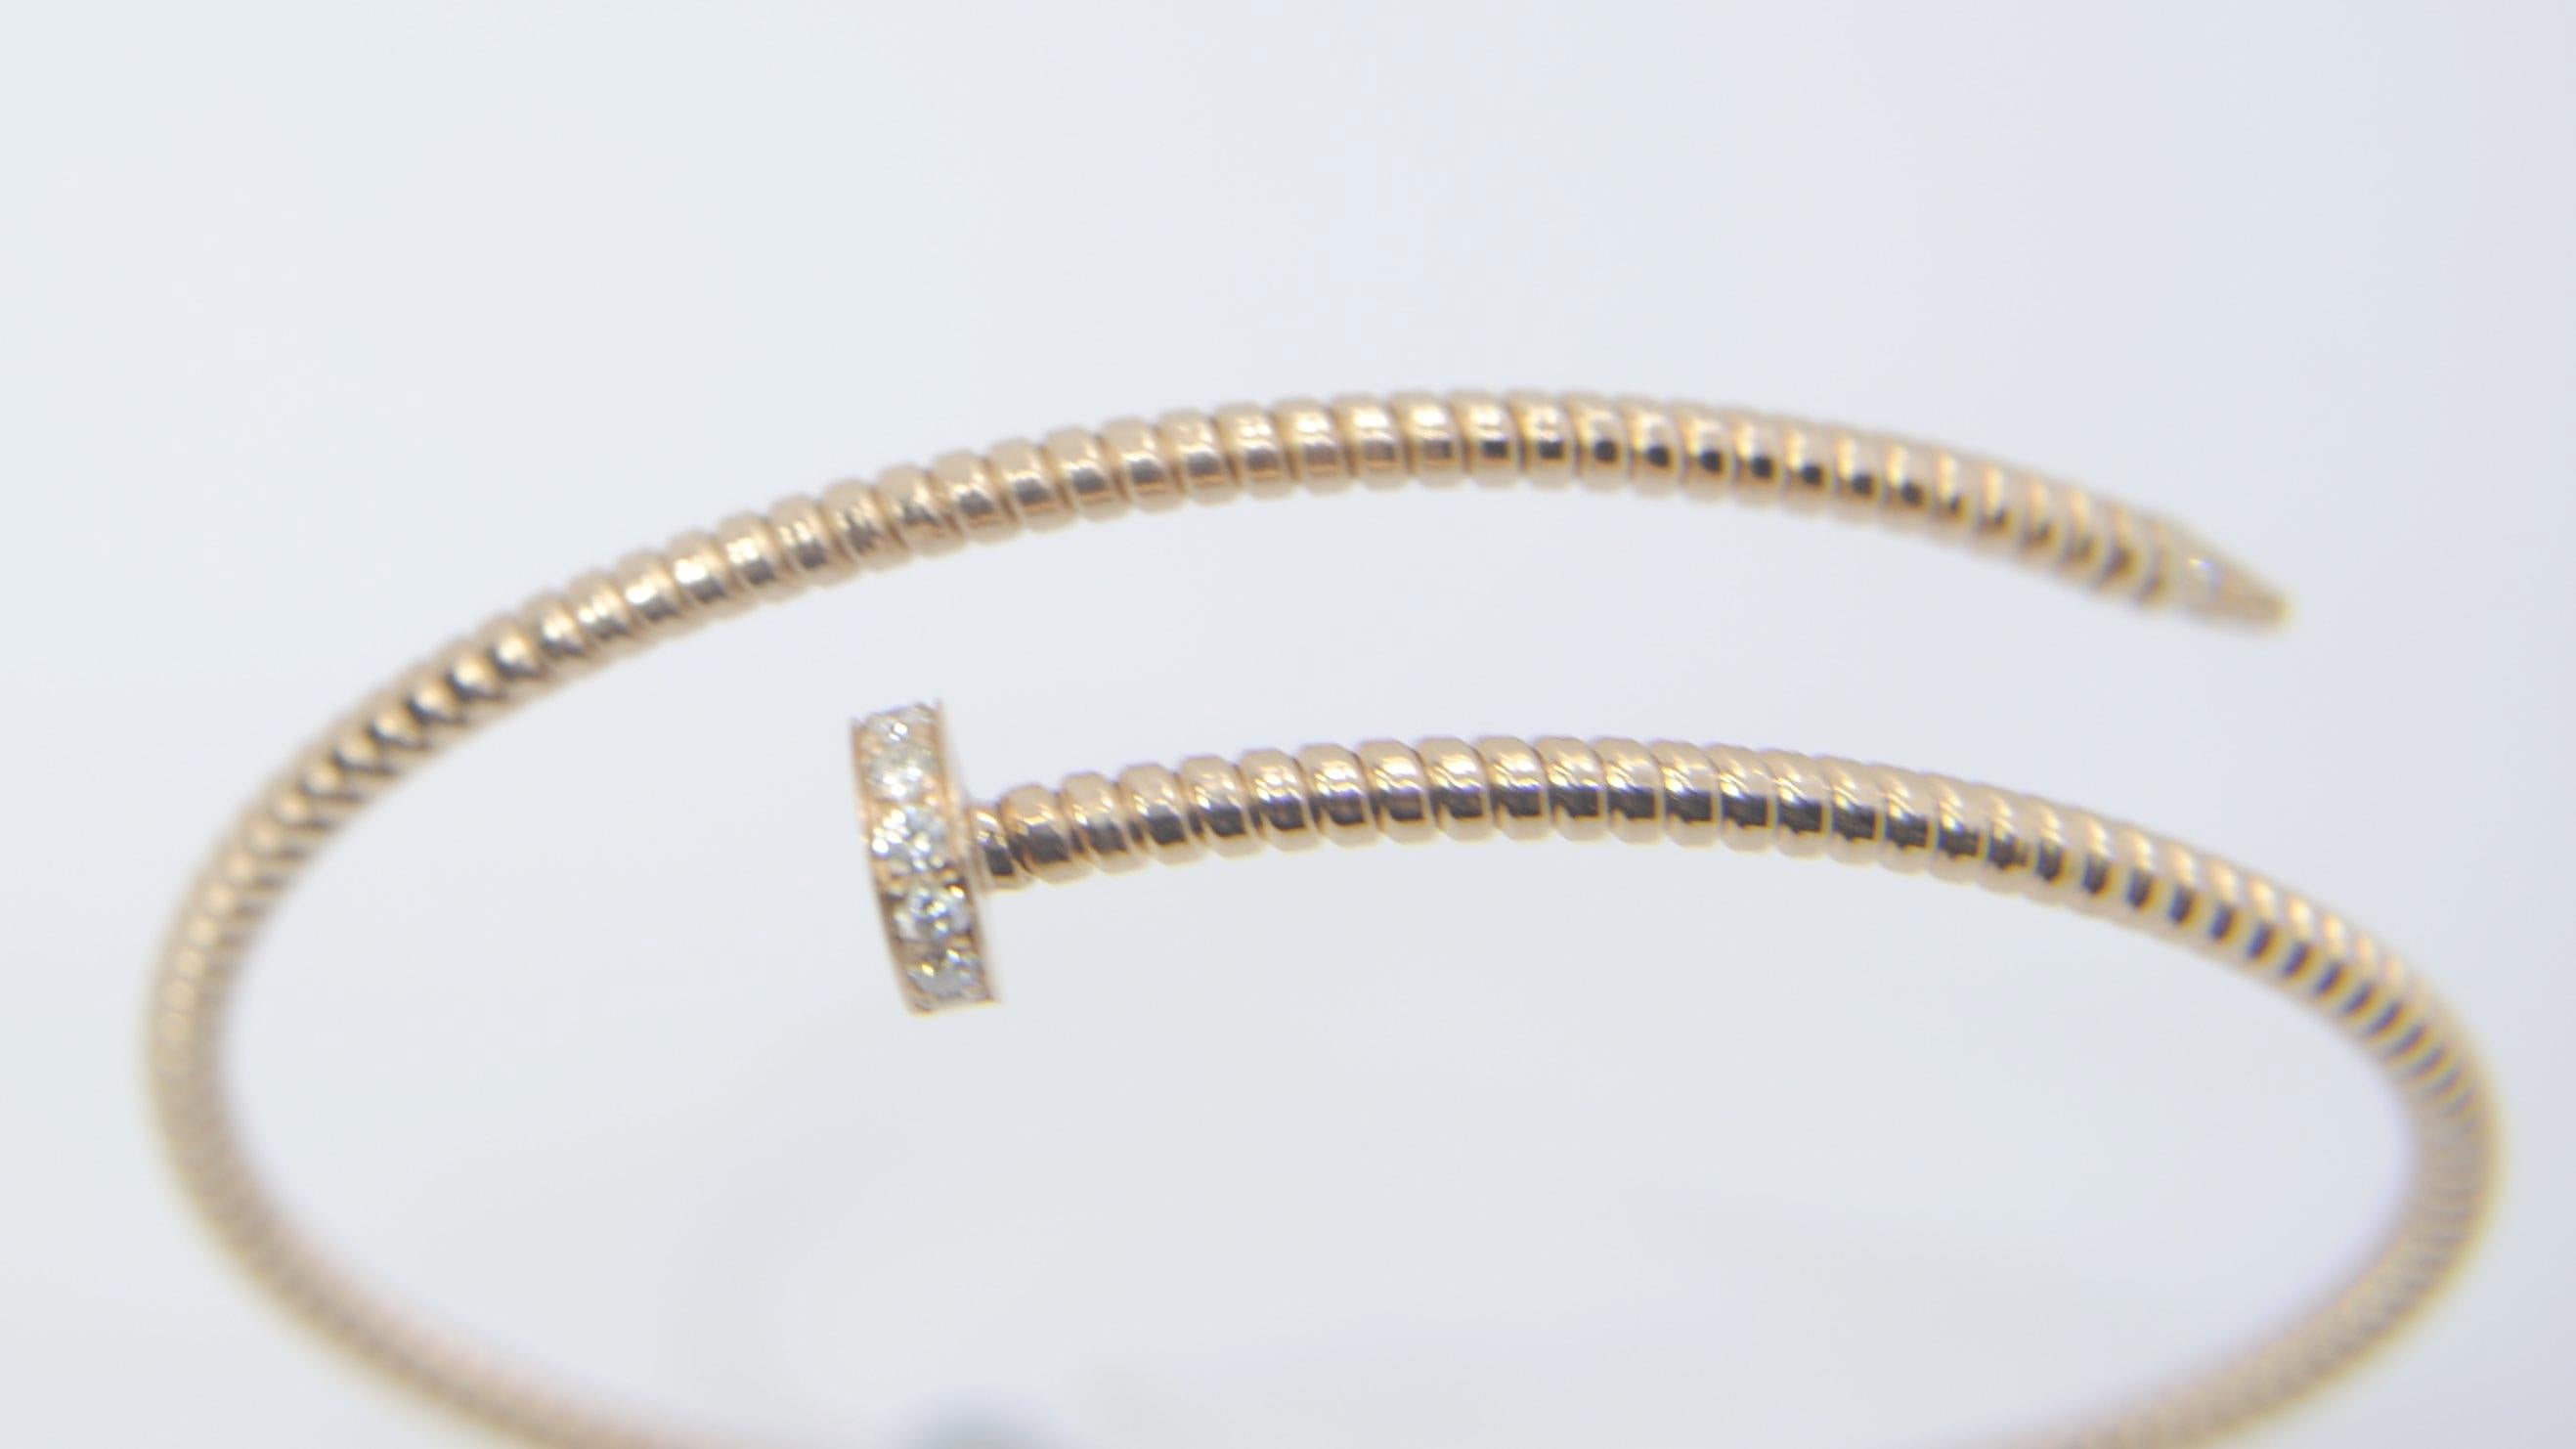 Flexible and adaptable bracelet with tubogas craftmanship that fits wrists of 7,87 inches medium to large
Available in three colours of gold, yellow, white and rose.
6,7GR and 0.15Carat Diamonds
Request availability if in stock 5 days handling